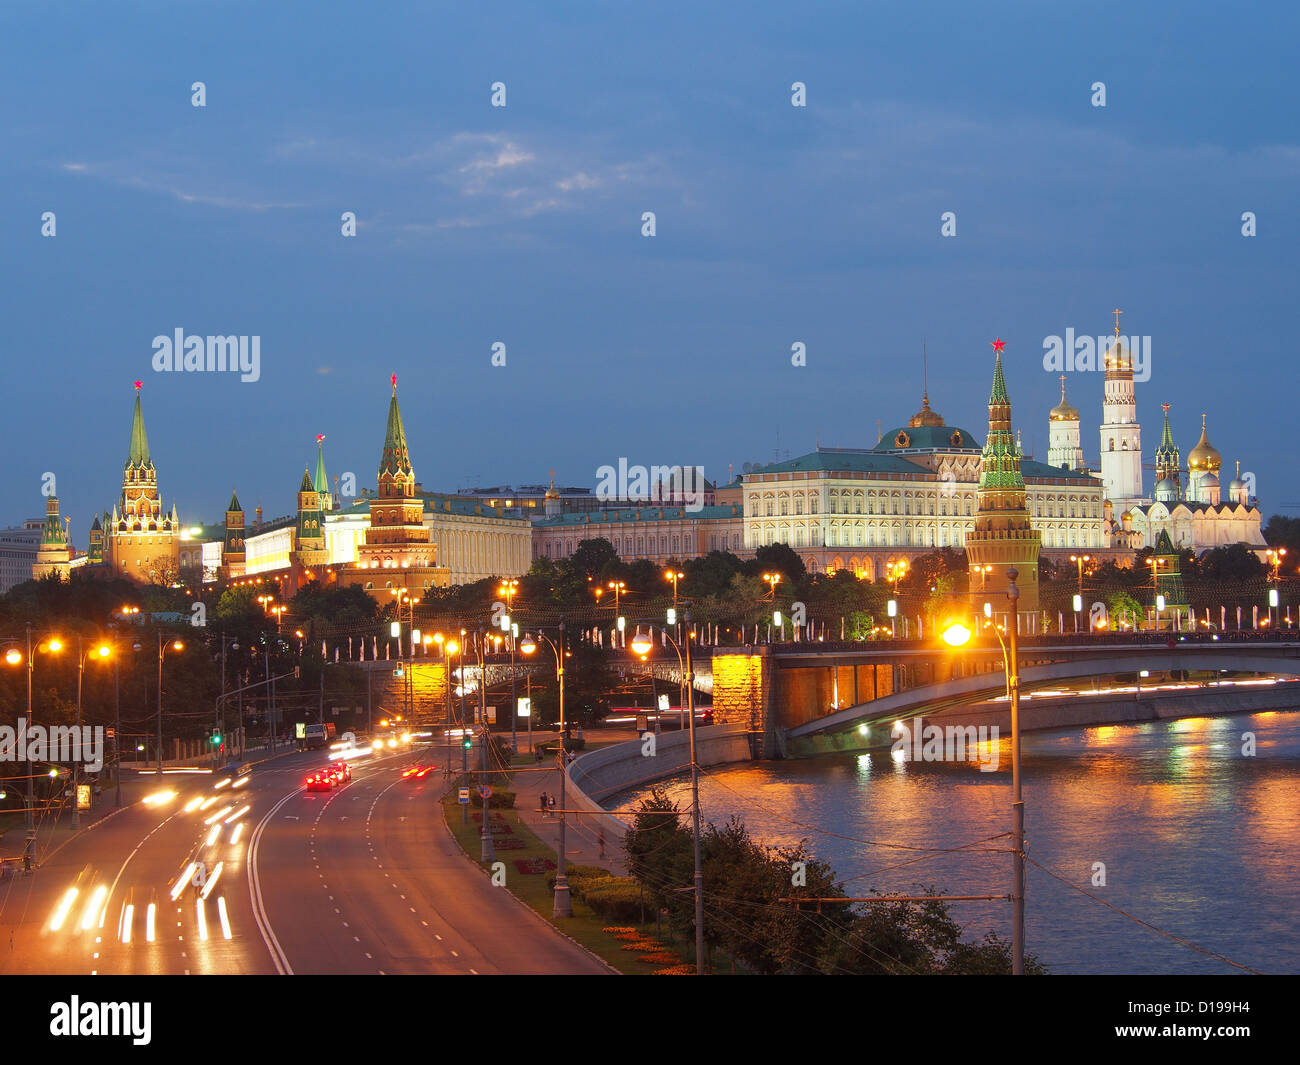 The Kremlin in Moscow by Night Stock Photo